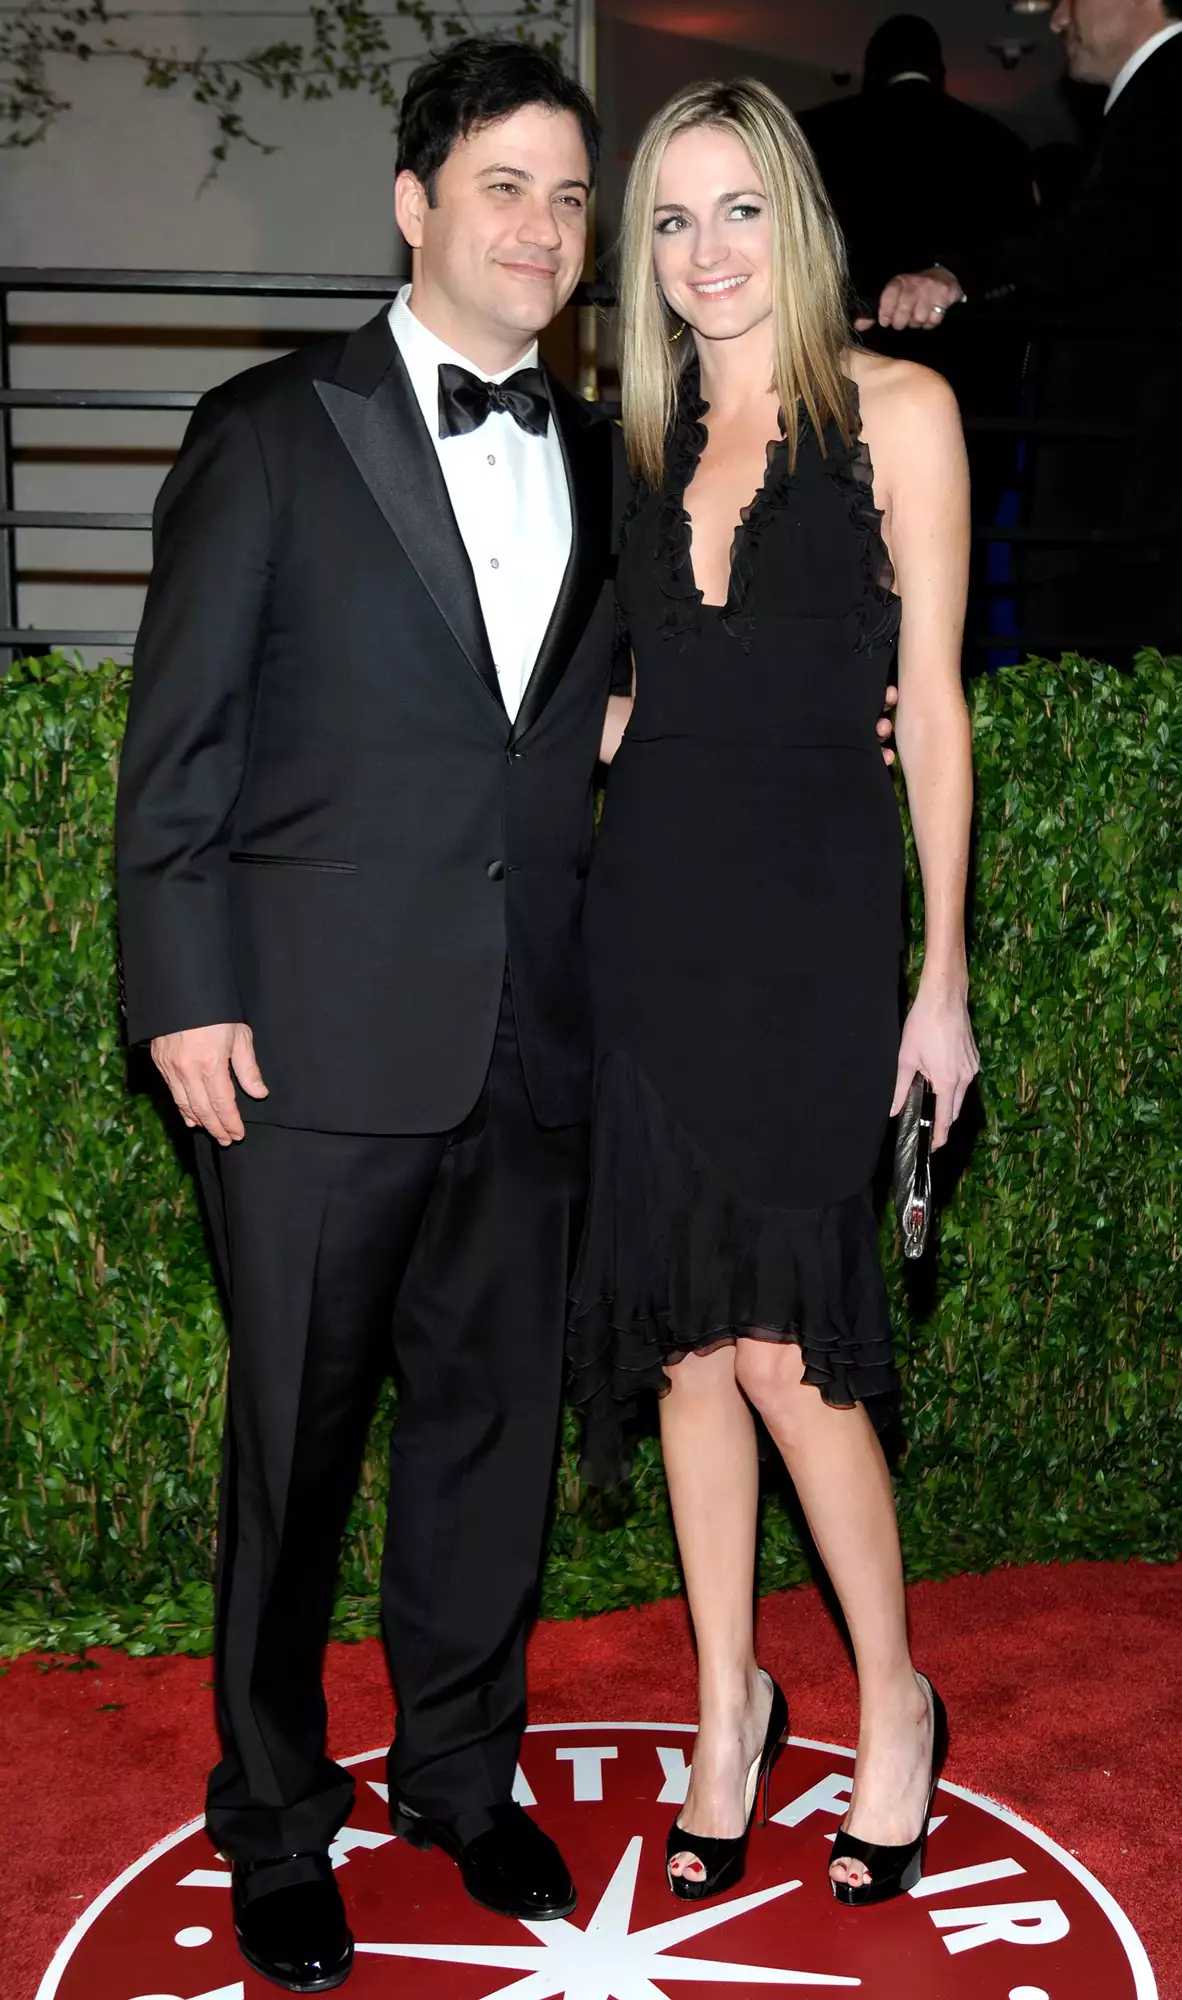 Who Is Jimmy Kimmel's Wife? All About Molly McNearney